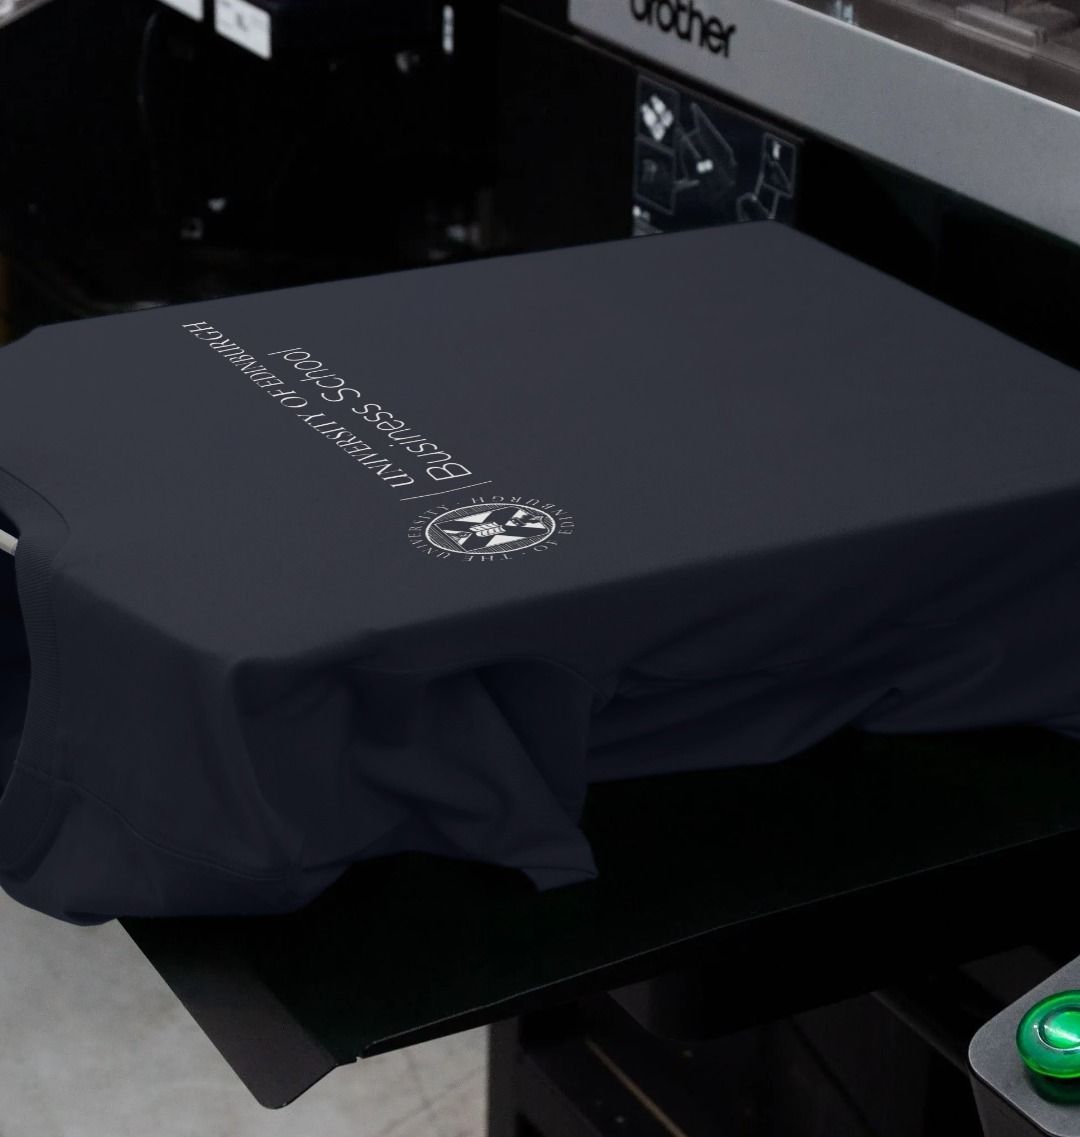 Our Business School T-Shirt being printed by our print on demand partner, teemill.